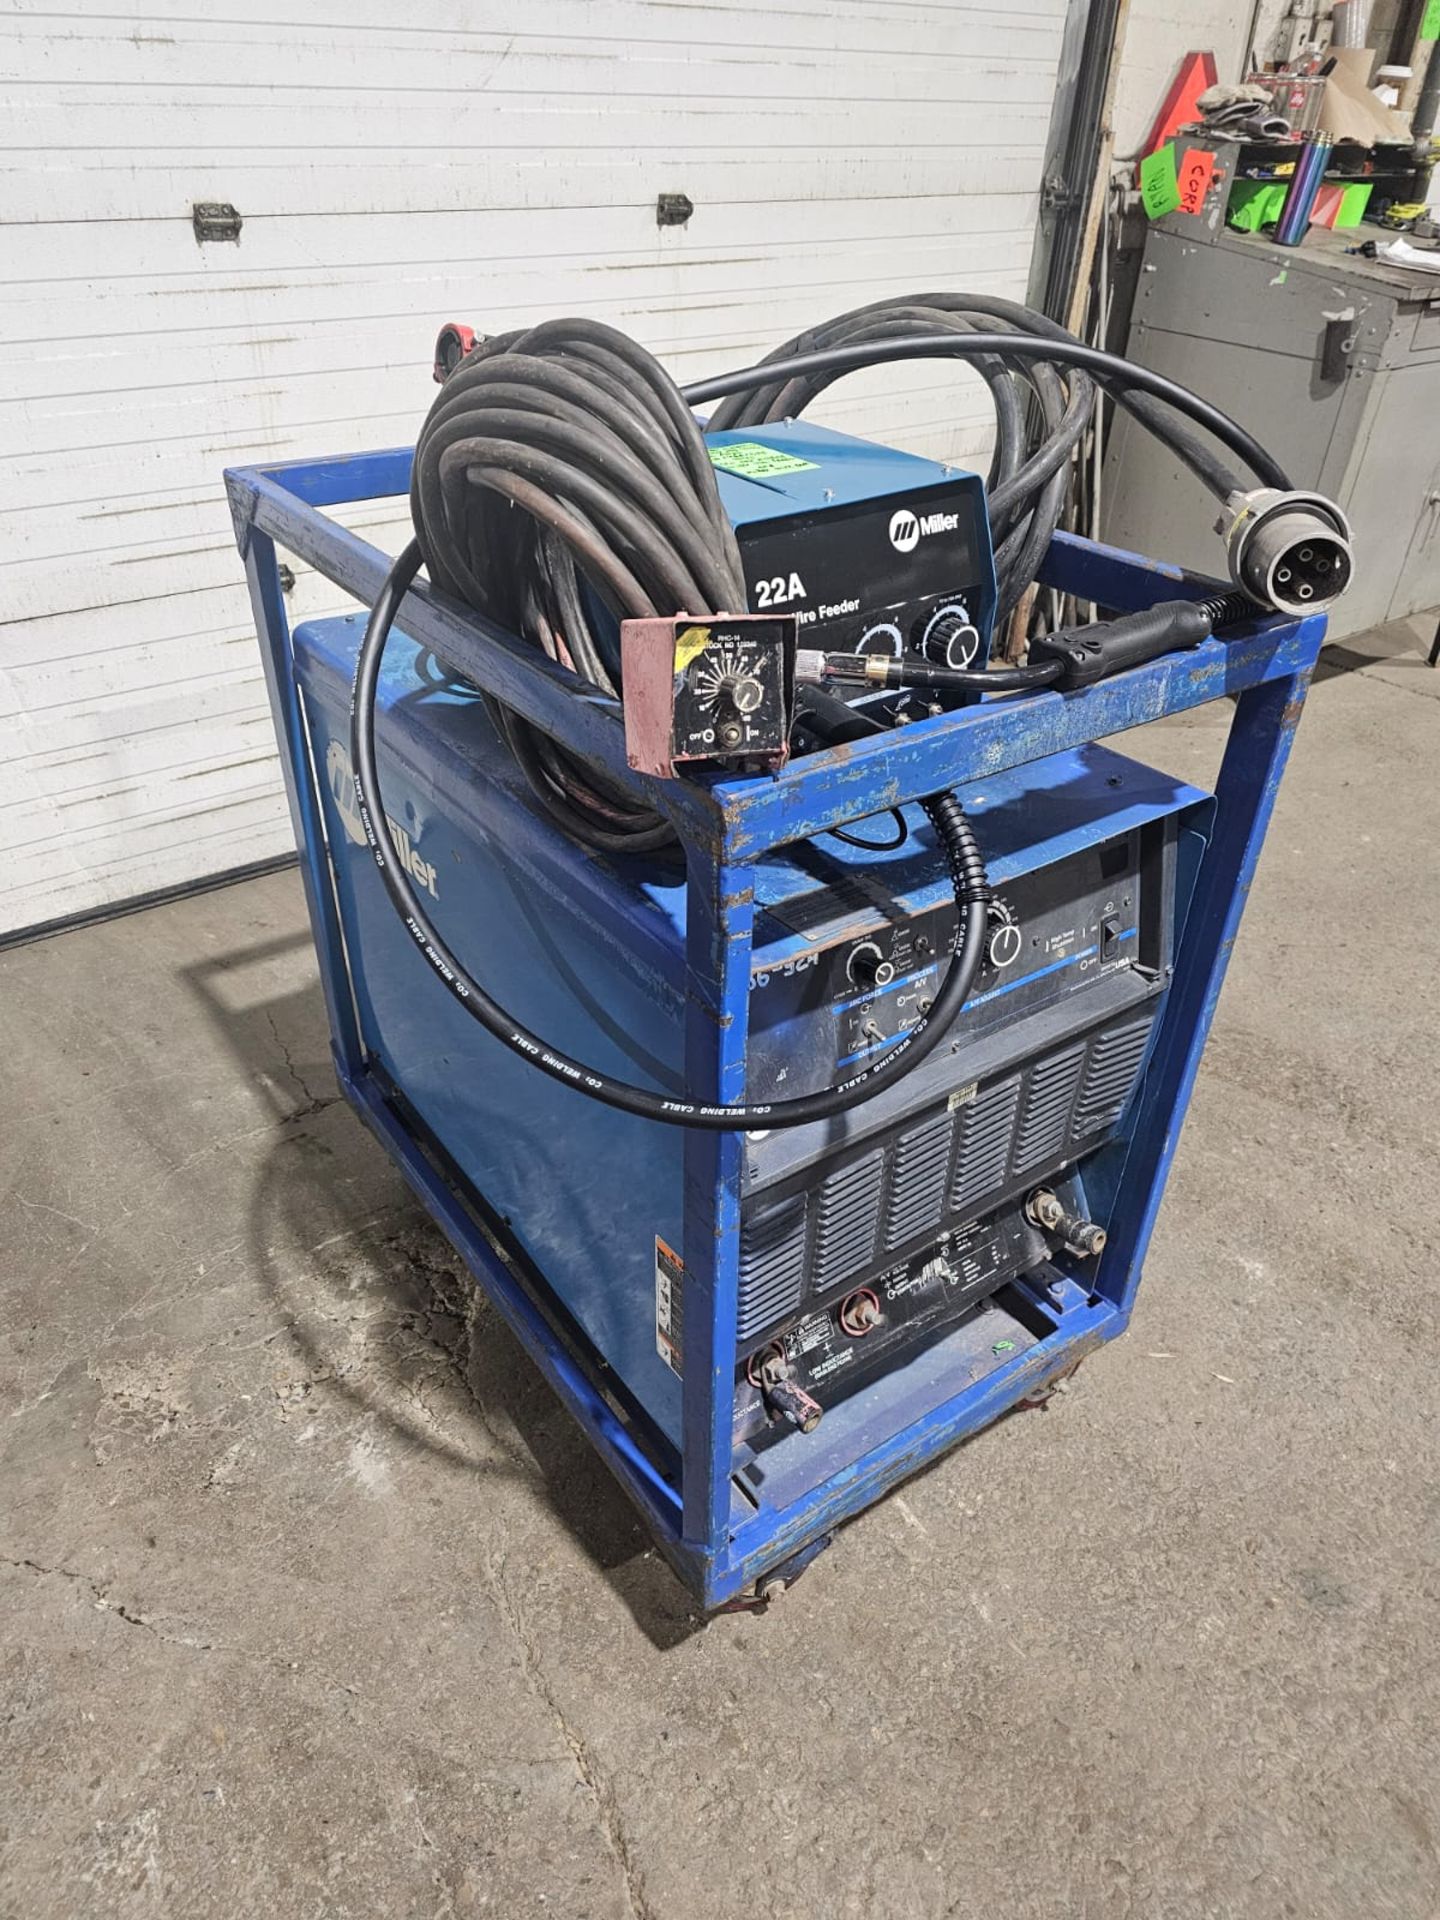 Miller Dimension 652 Mig Welder 650 Amp Mig Tig Stick Multi Process Power Source with 22A Wire - Image 8 of 8